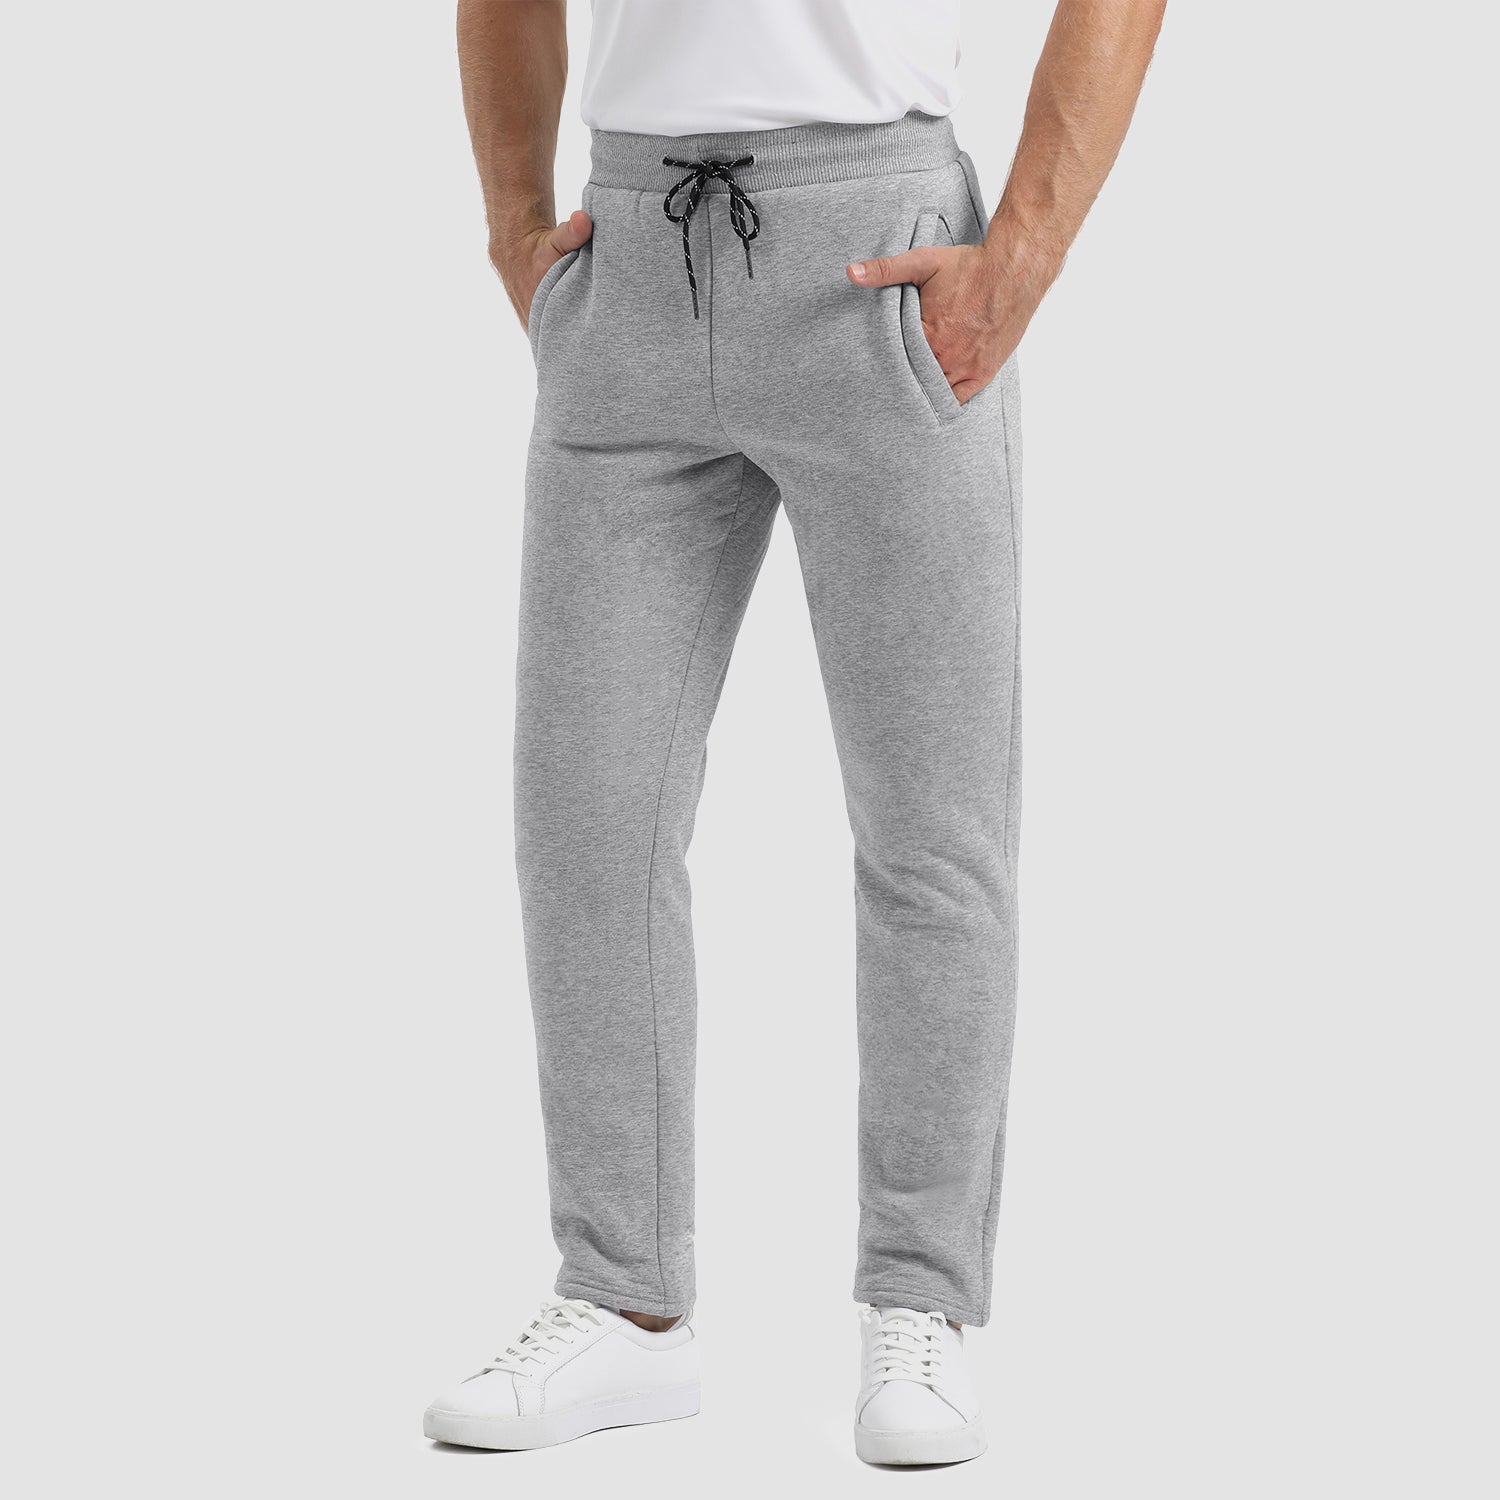 Mens Winter Casual Fleece Lined Pants Thick Warm Loose Long Outdoor Trousers  New | eBay